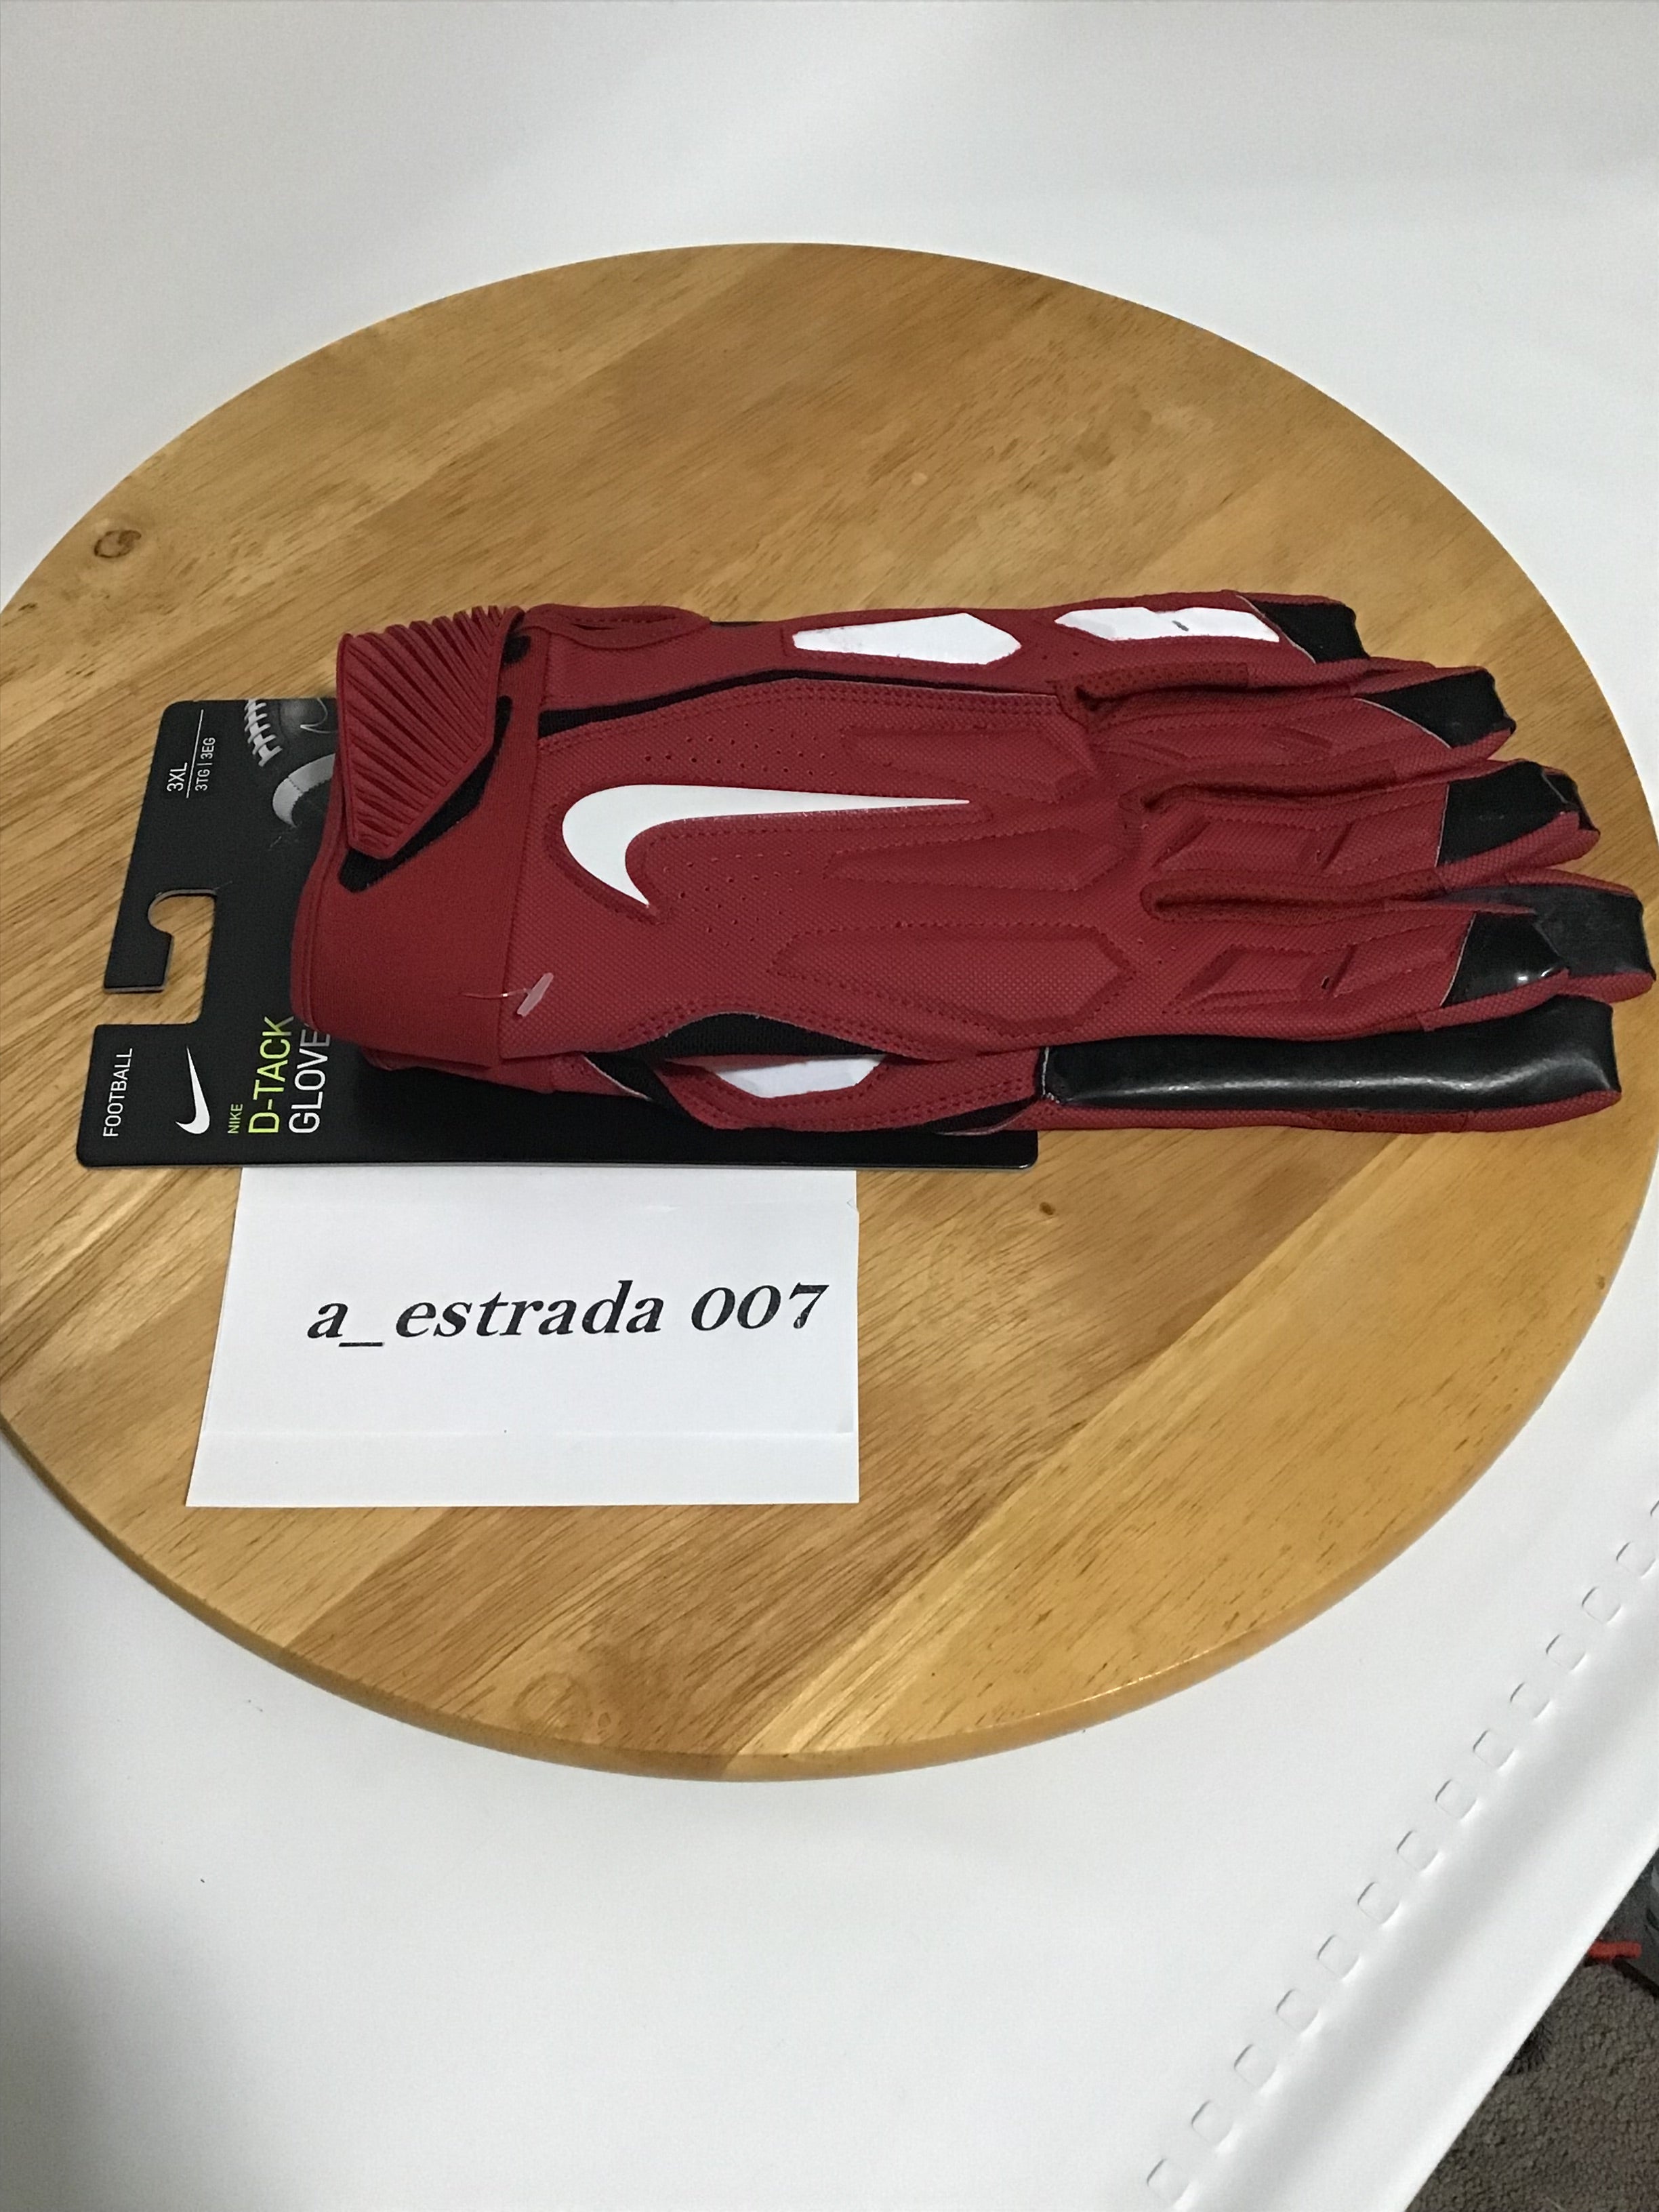 Nike 5.0 Football Gloves for sale | and Used on SidelineSwap